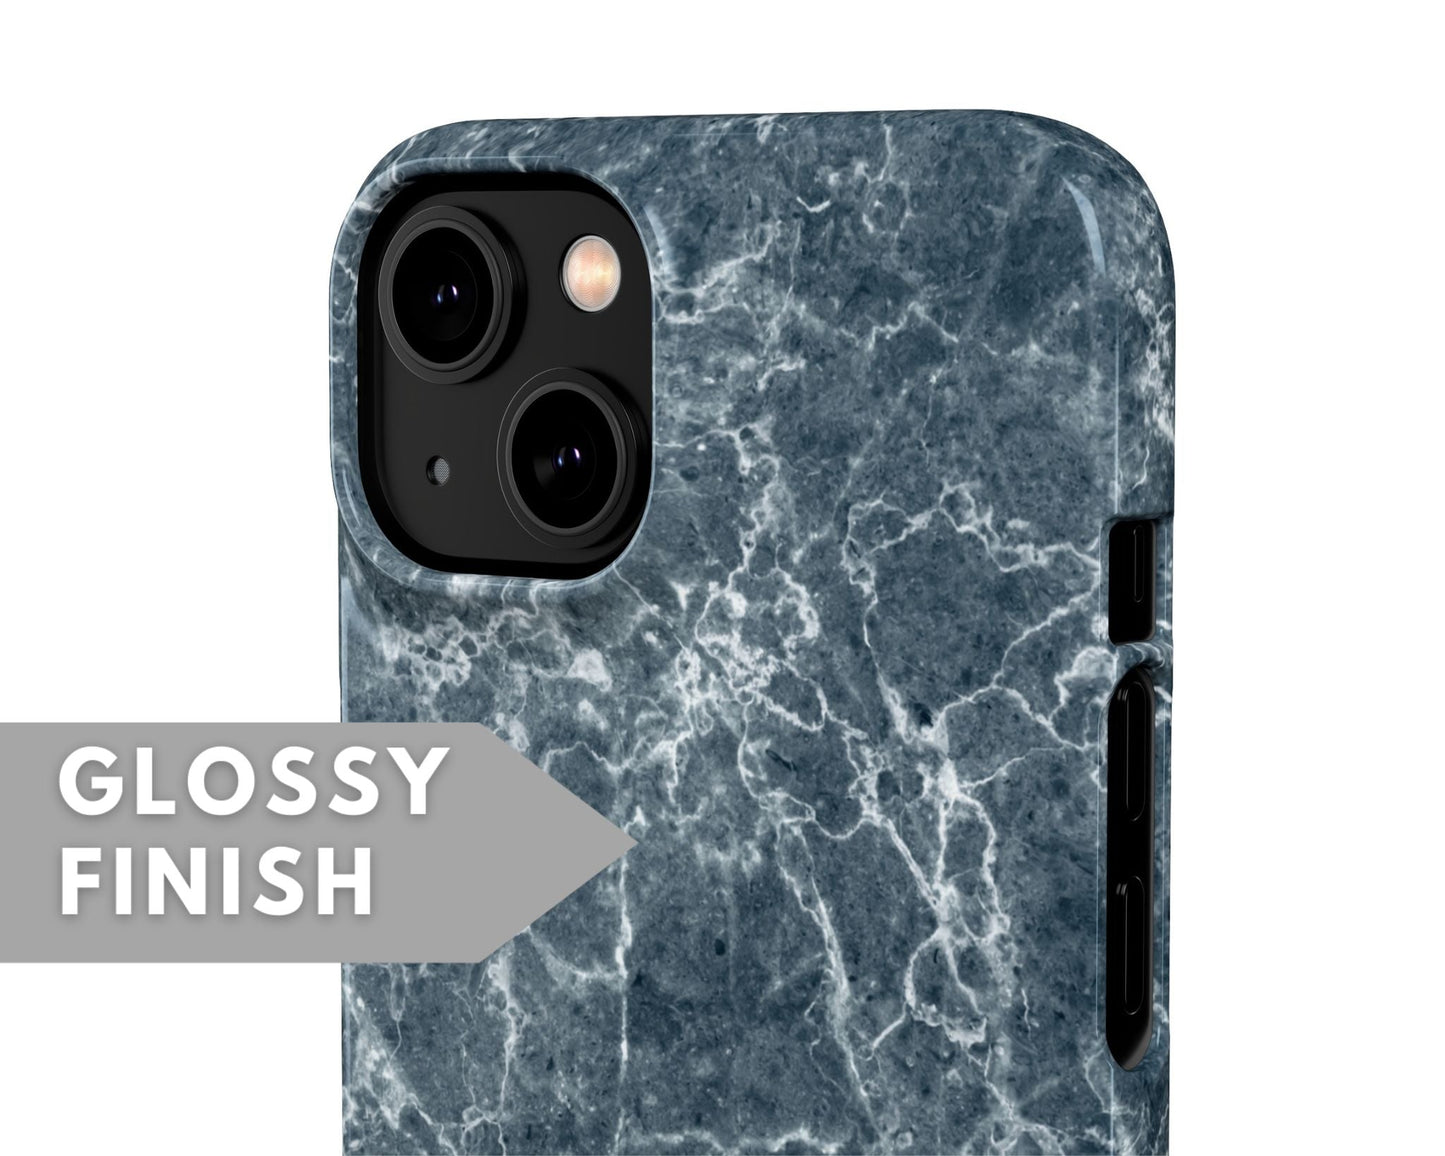 Teal Marble Snap Case - Classy Cases